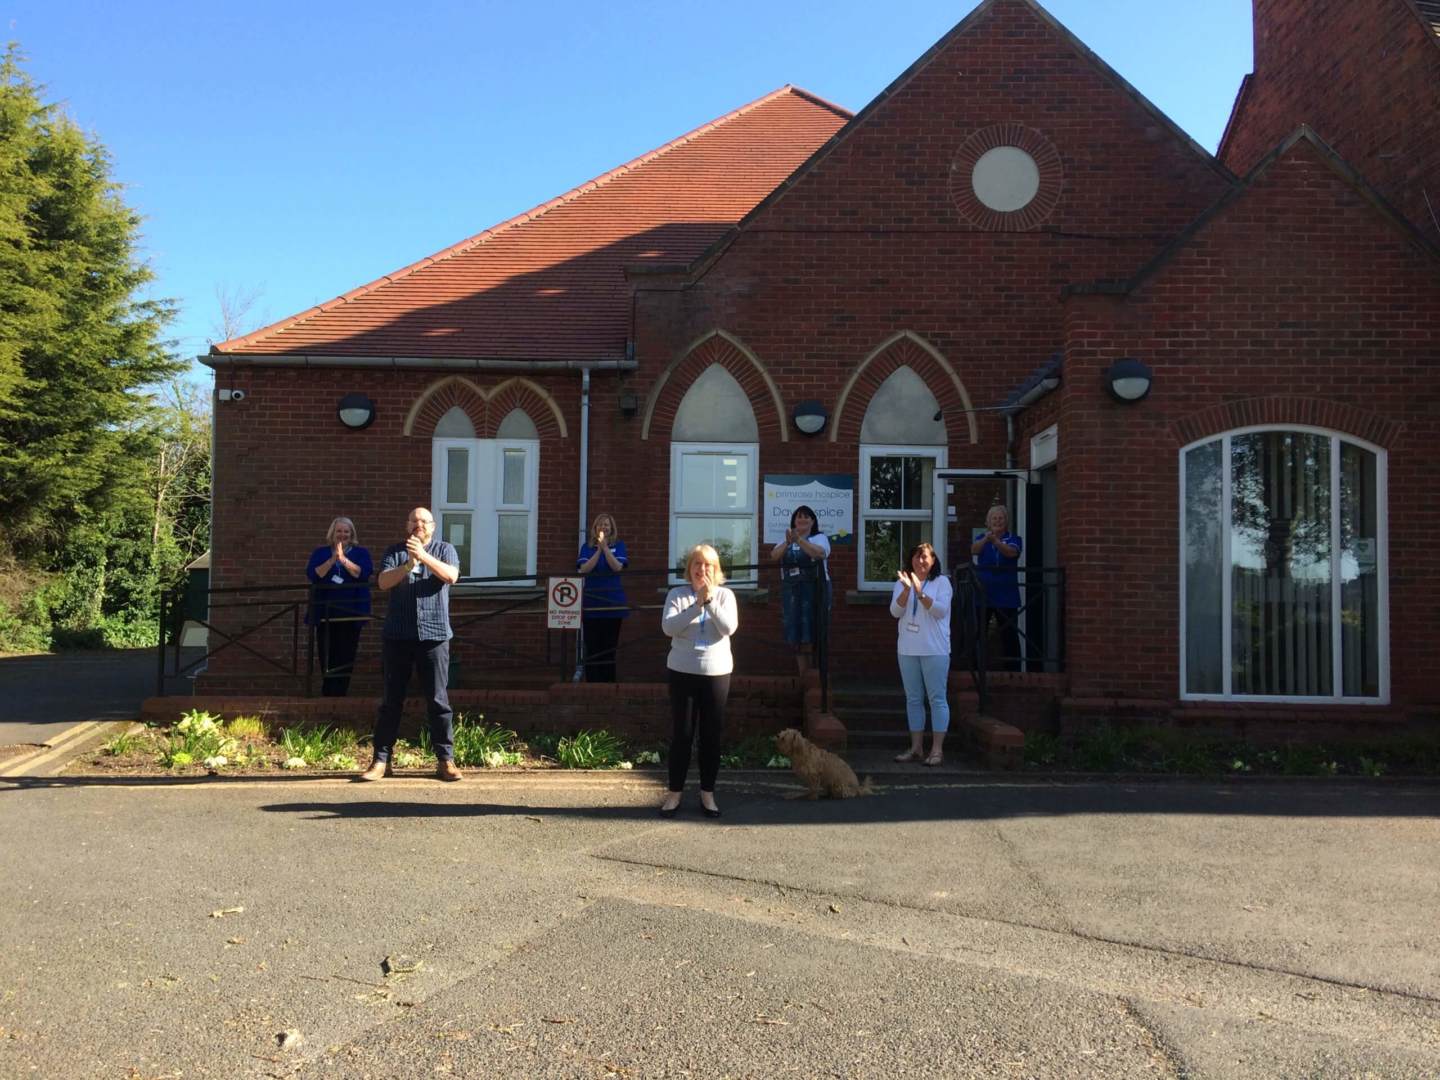 The carers of Primrose Hospice clapping outside their premises maintaining social distance